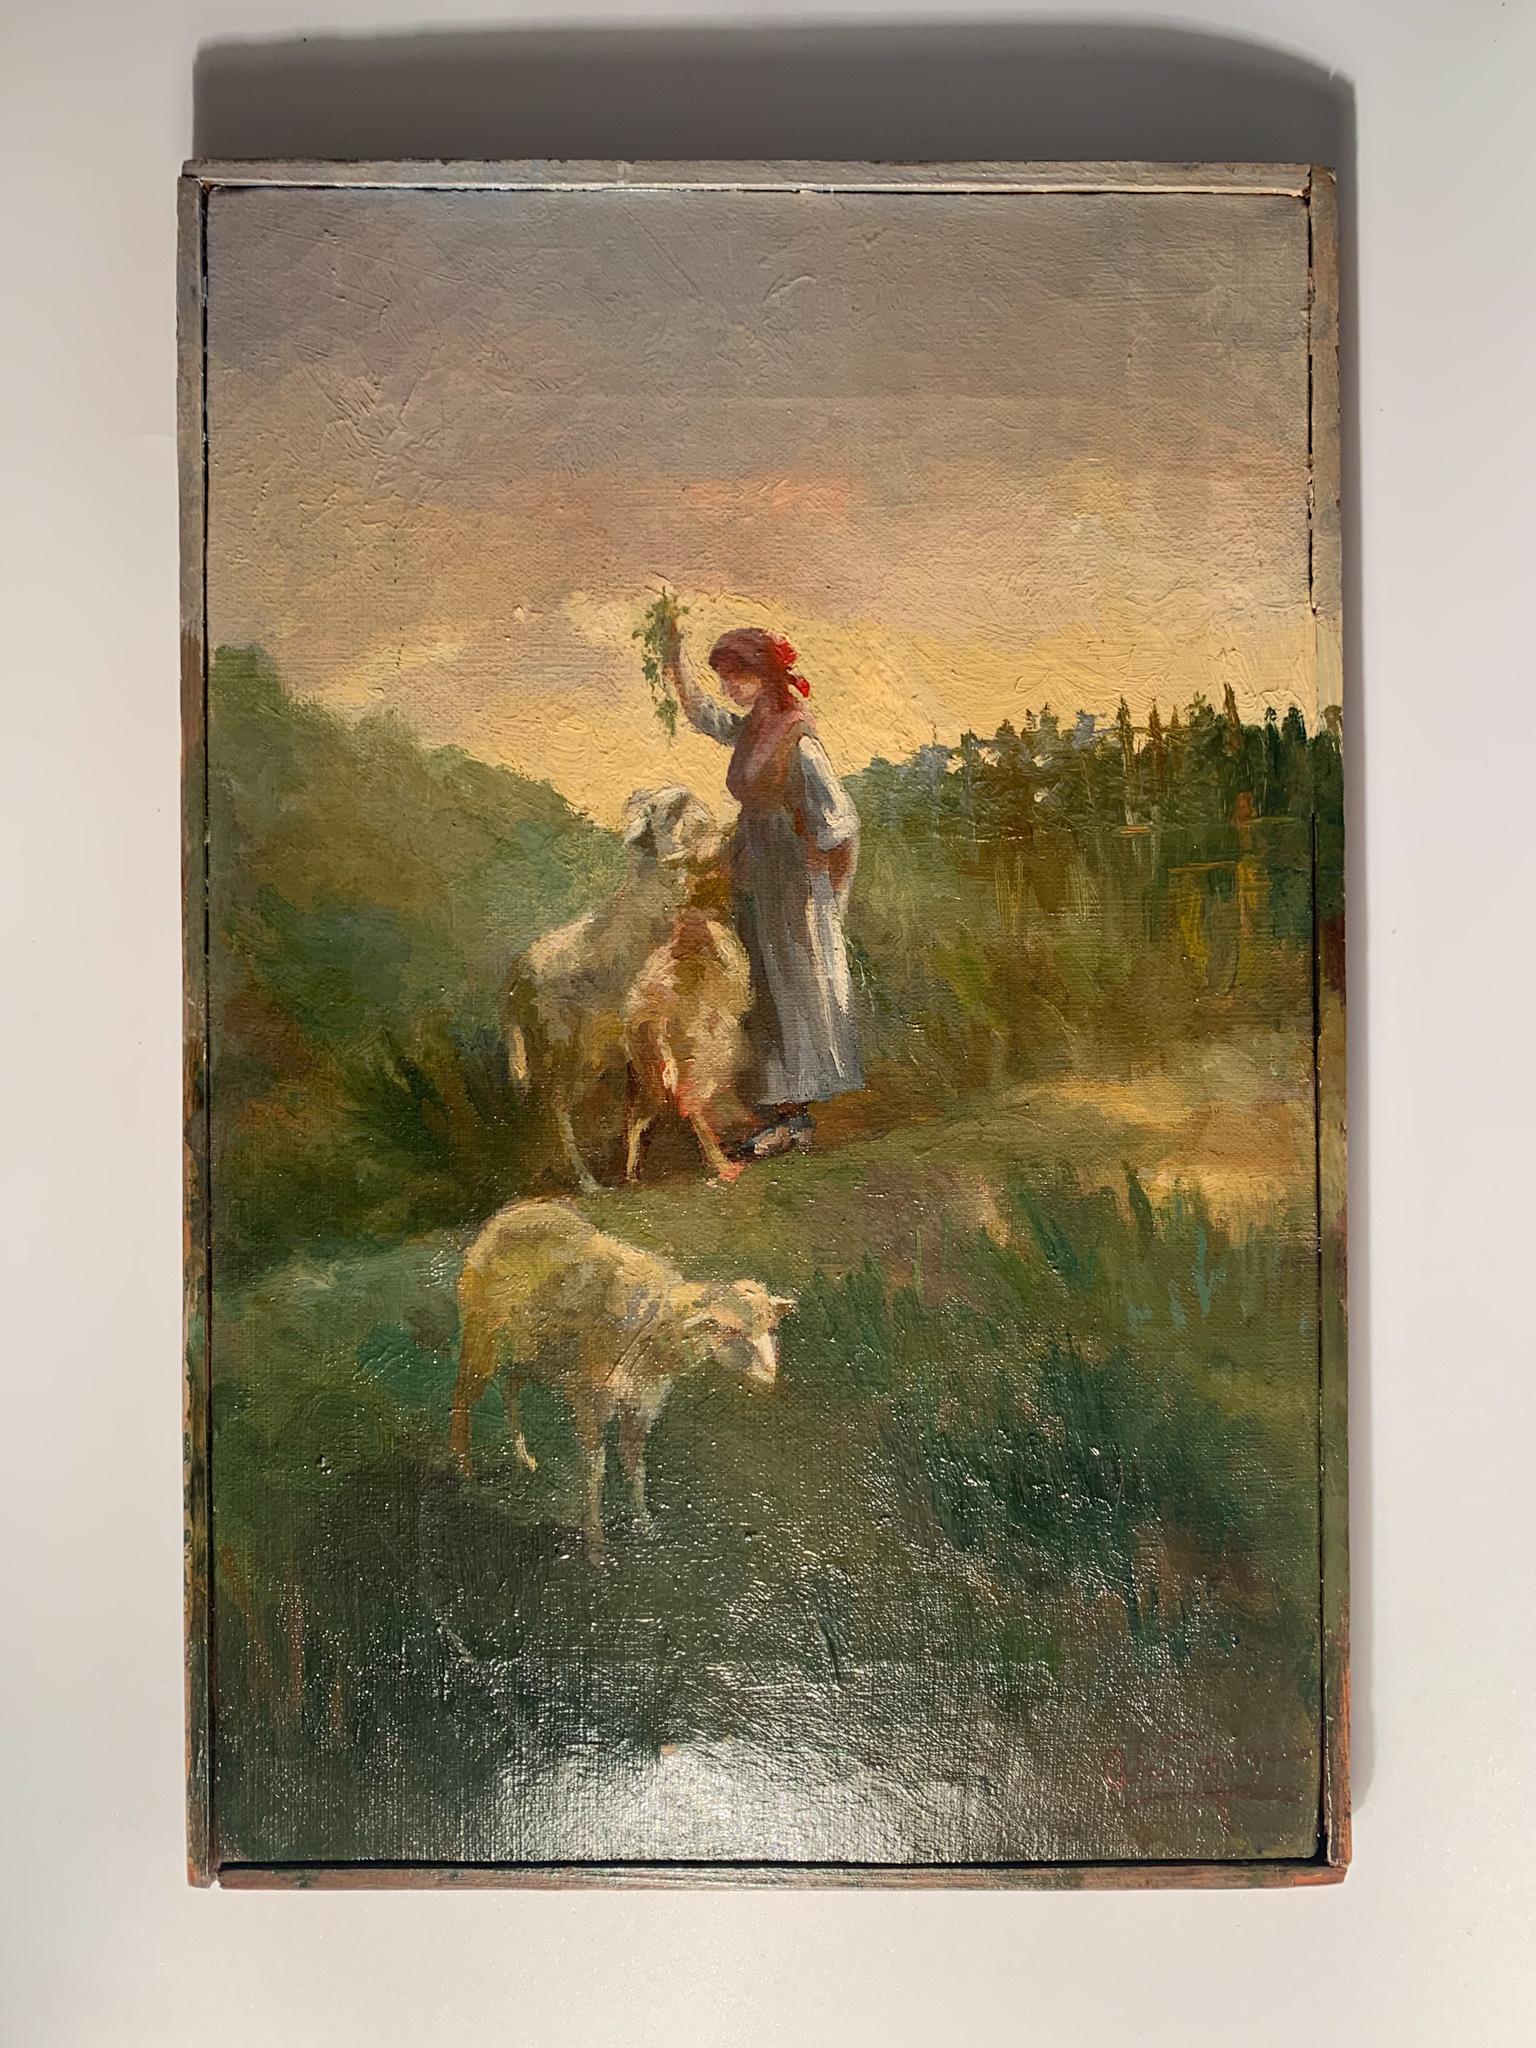 Oil painting on panel depicting a lady in a countryside landscape, made by Antonio De Simone in 1800

Ø cm 22 h cm 33